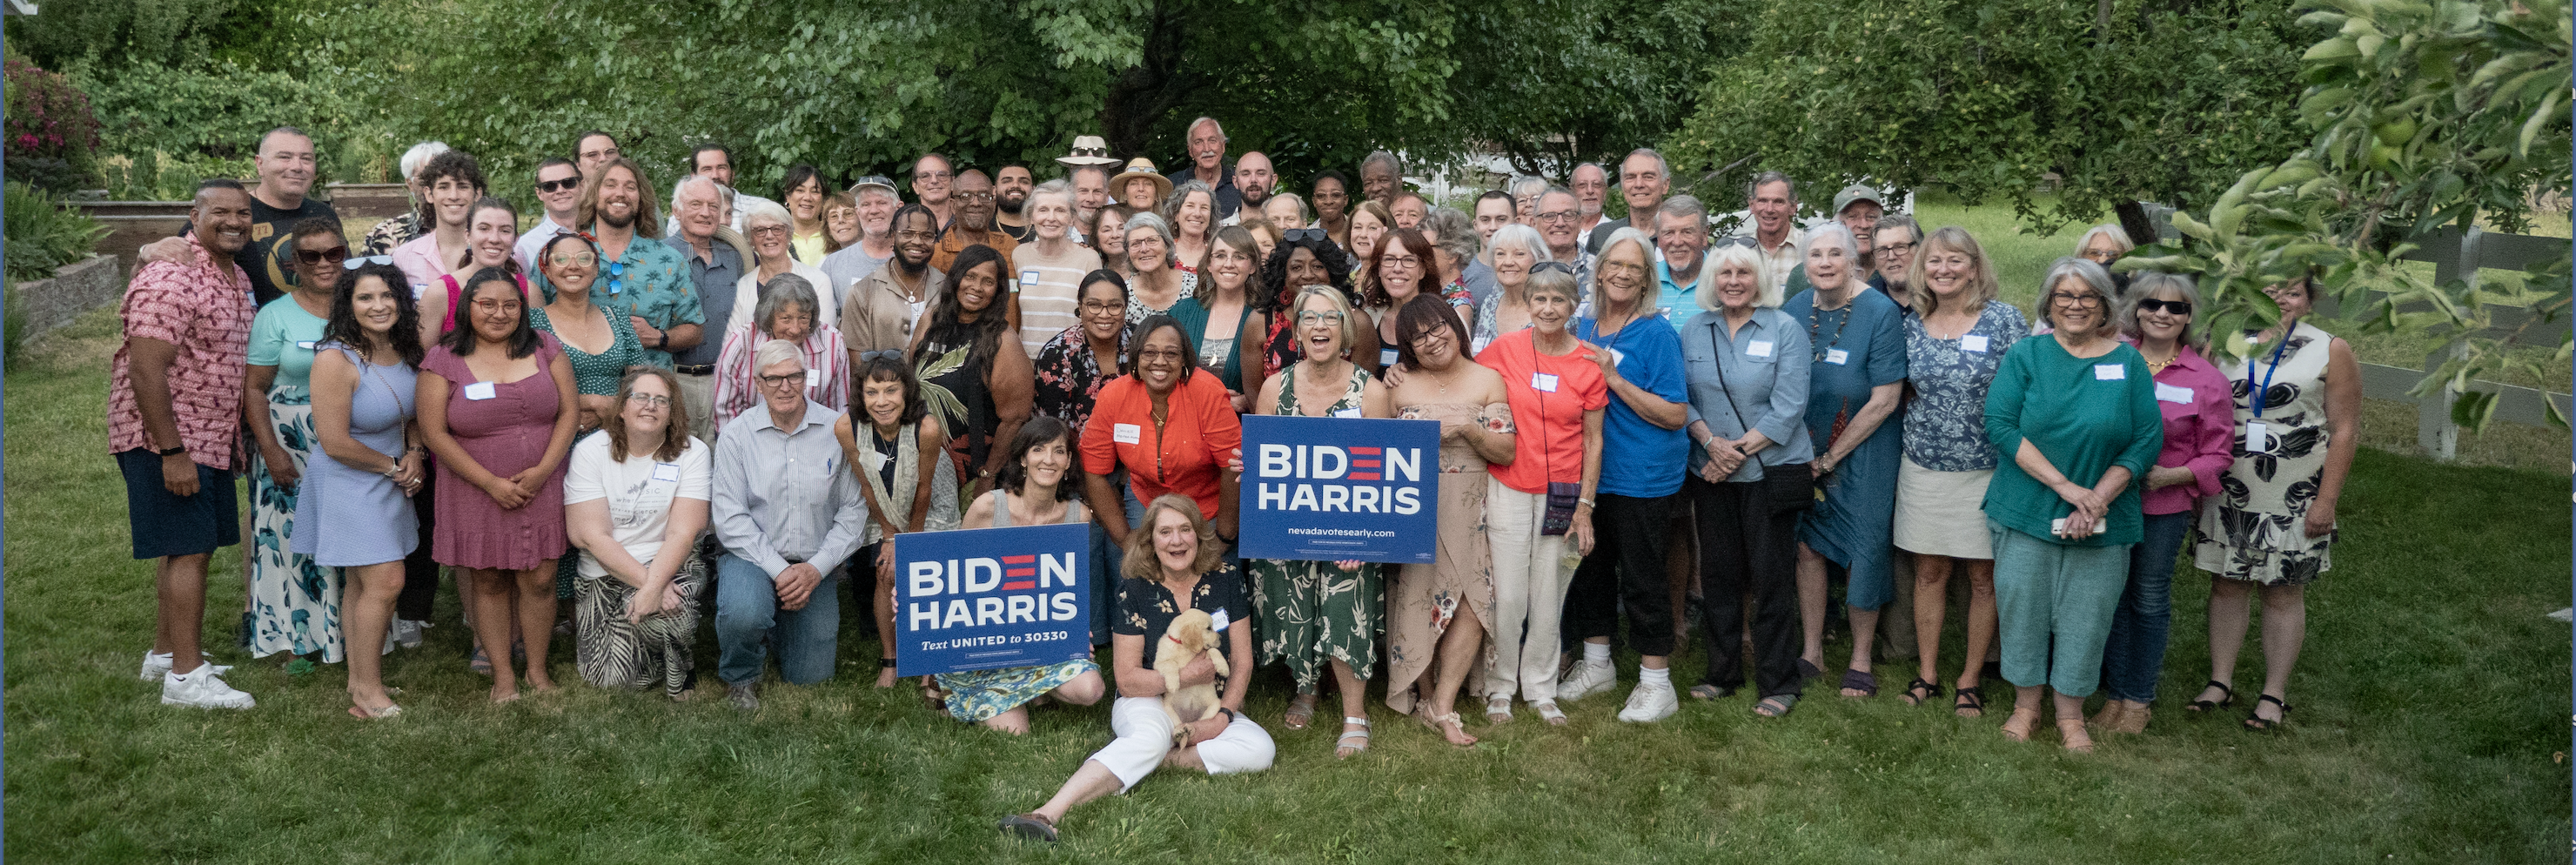 Group of people holding Biden signs in a backyard